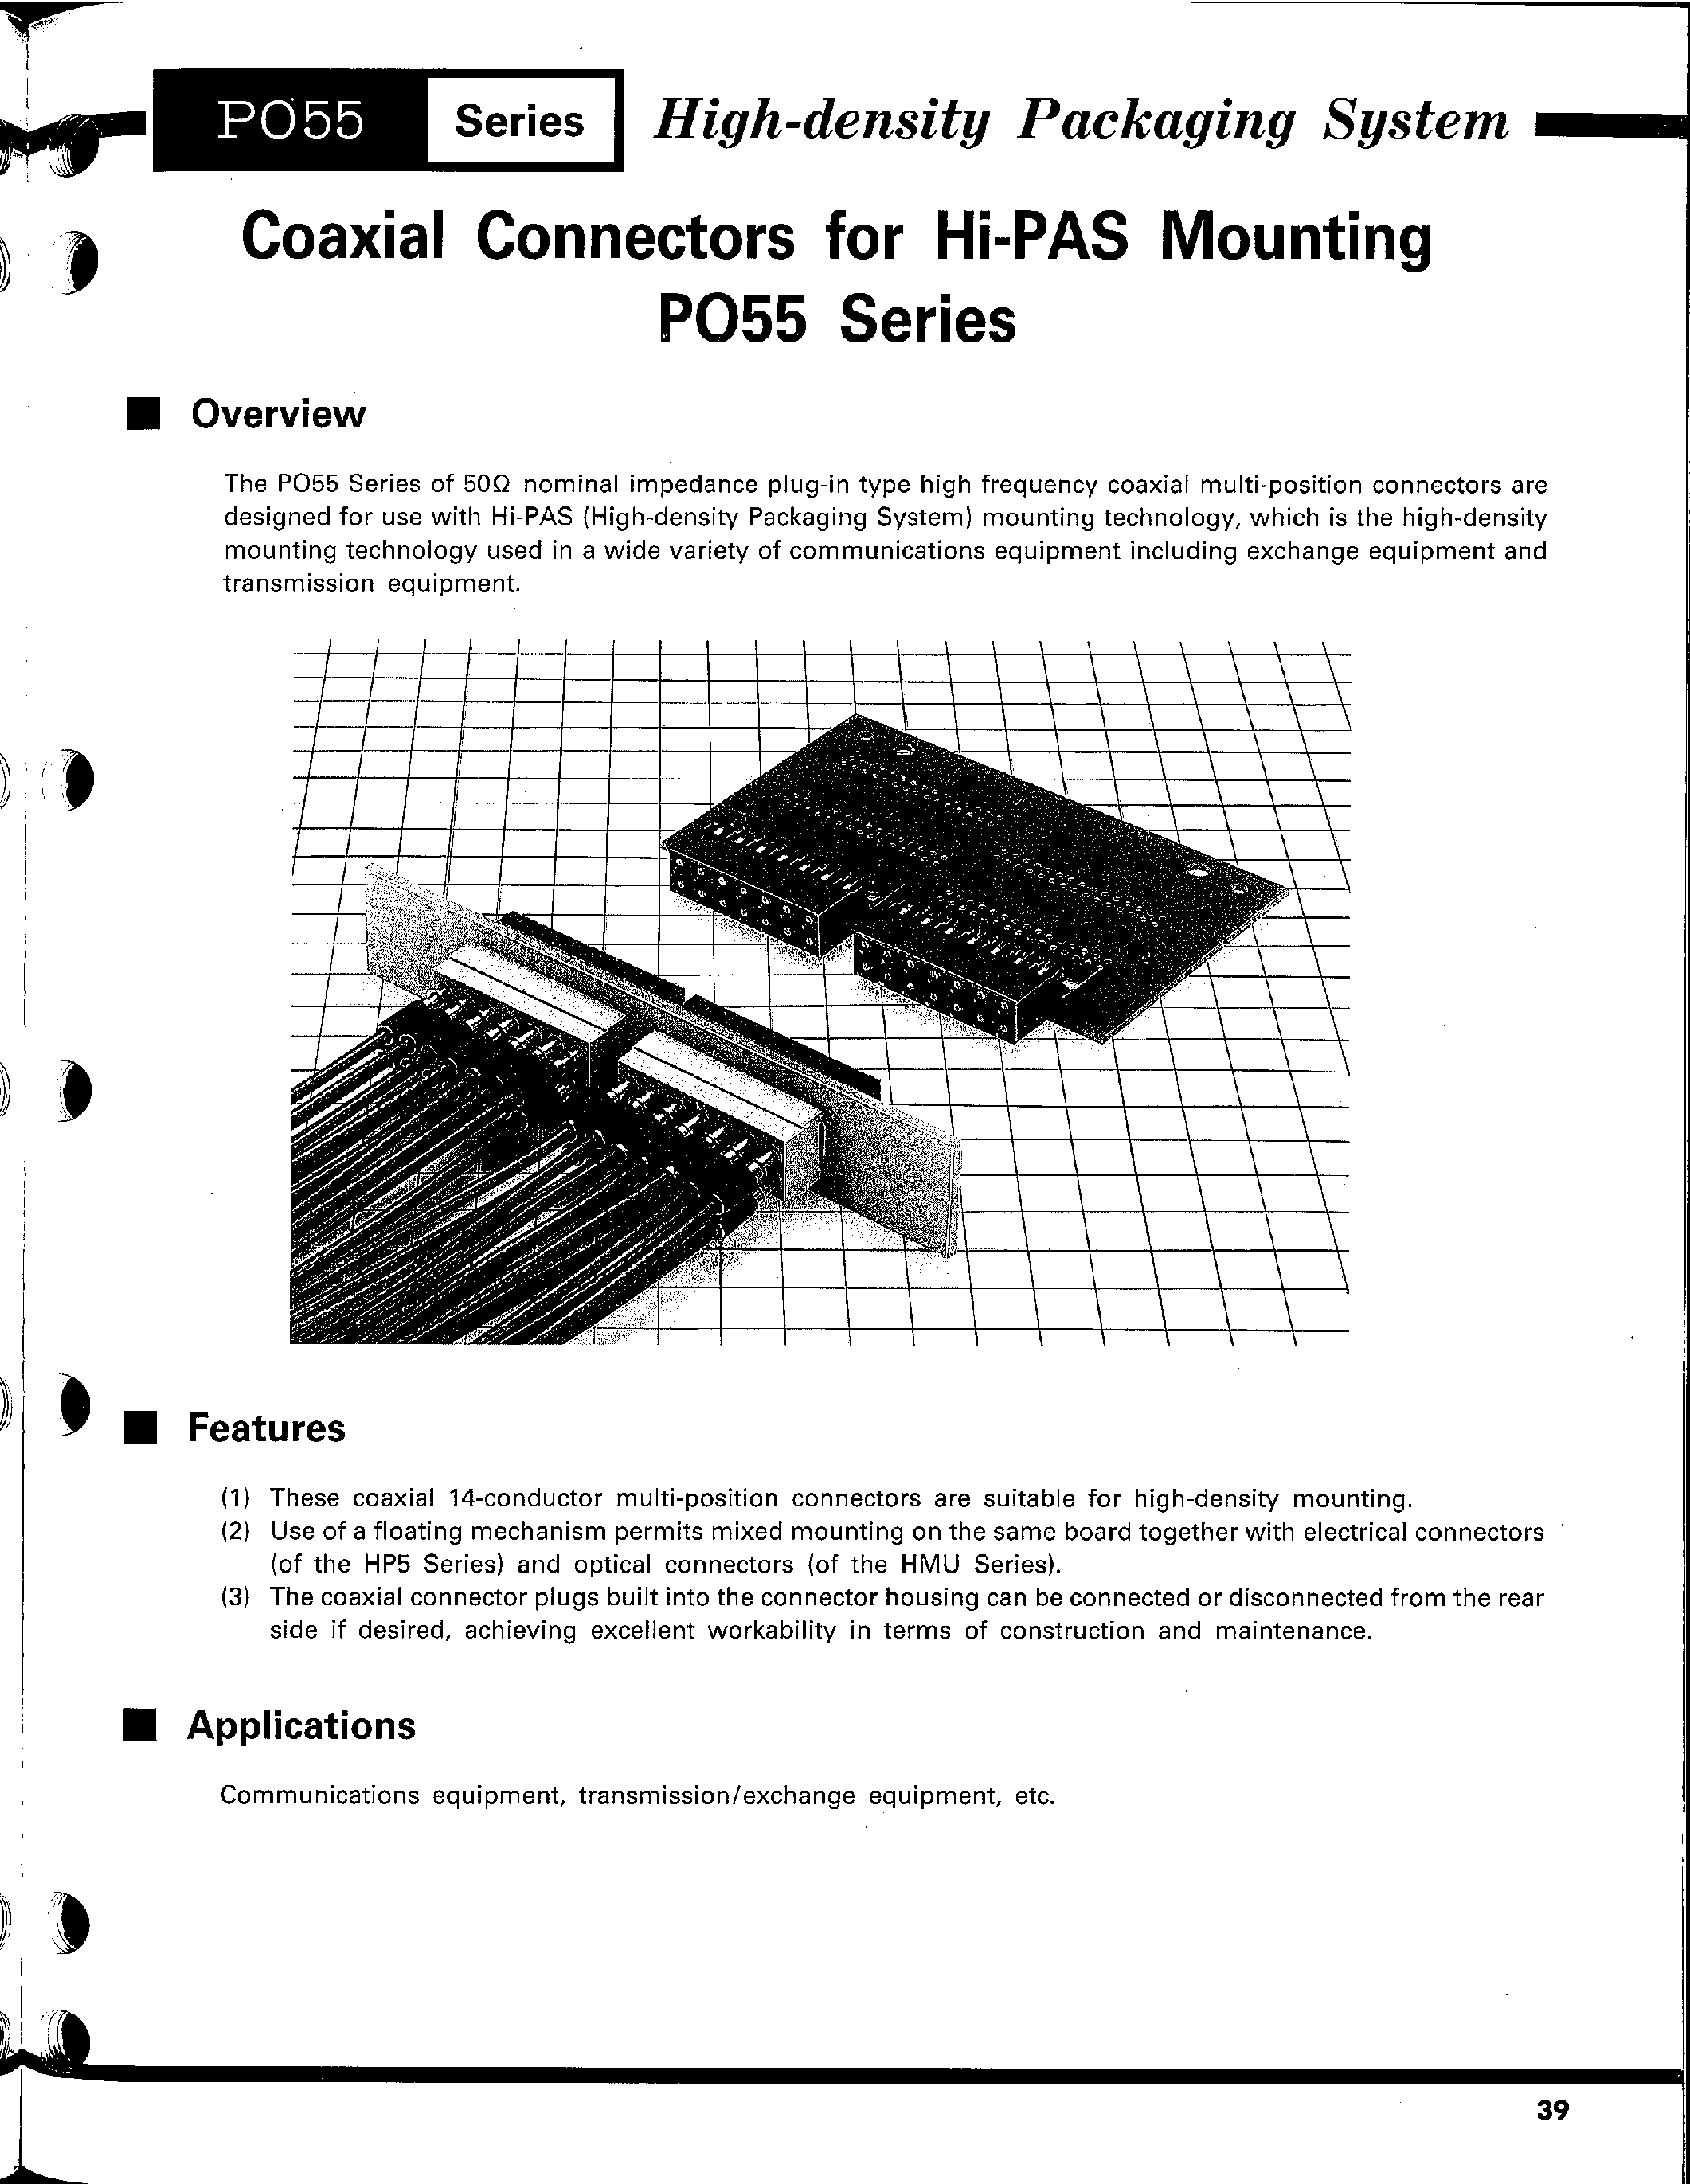 Datasheet PO55-T-1 - High-density Packaging System(Coaxial Connectors for Hi-PAS Mounting) page 1